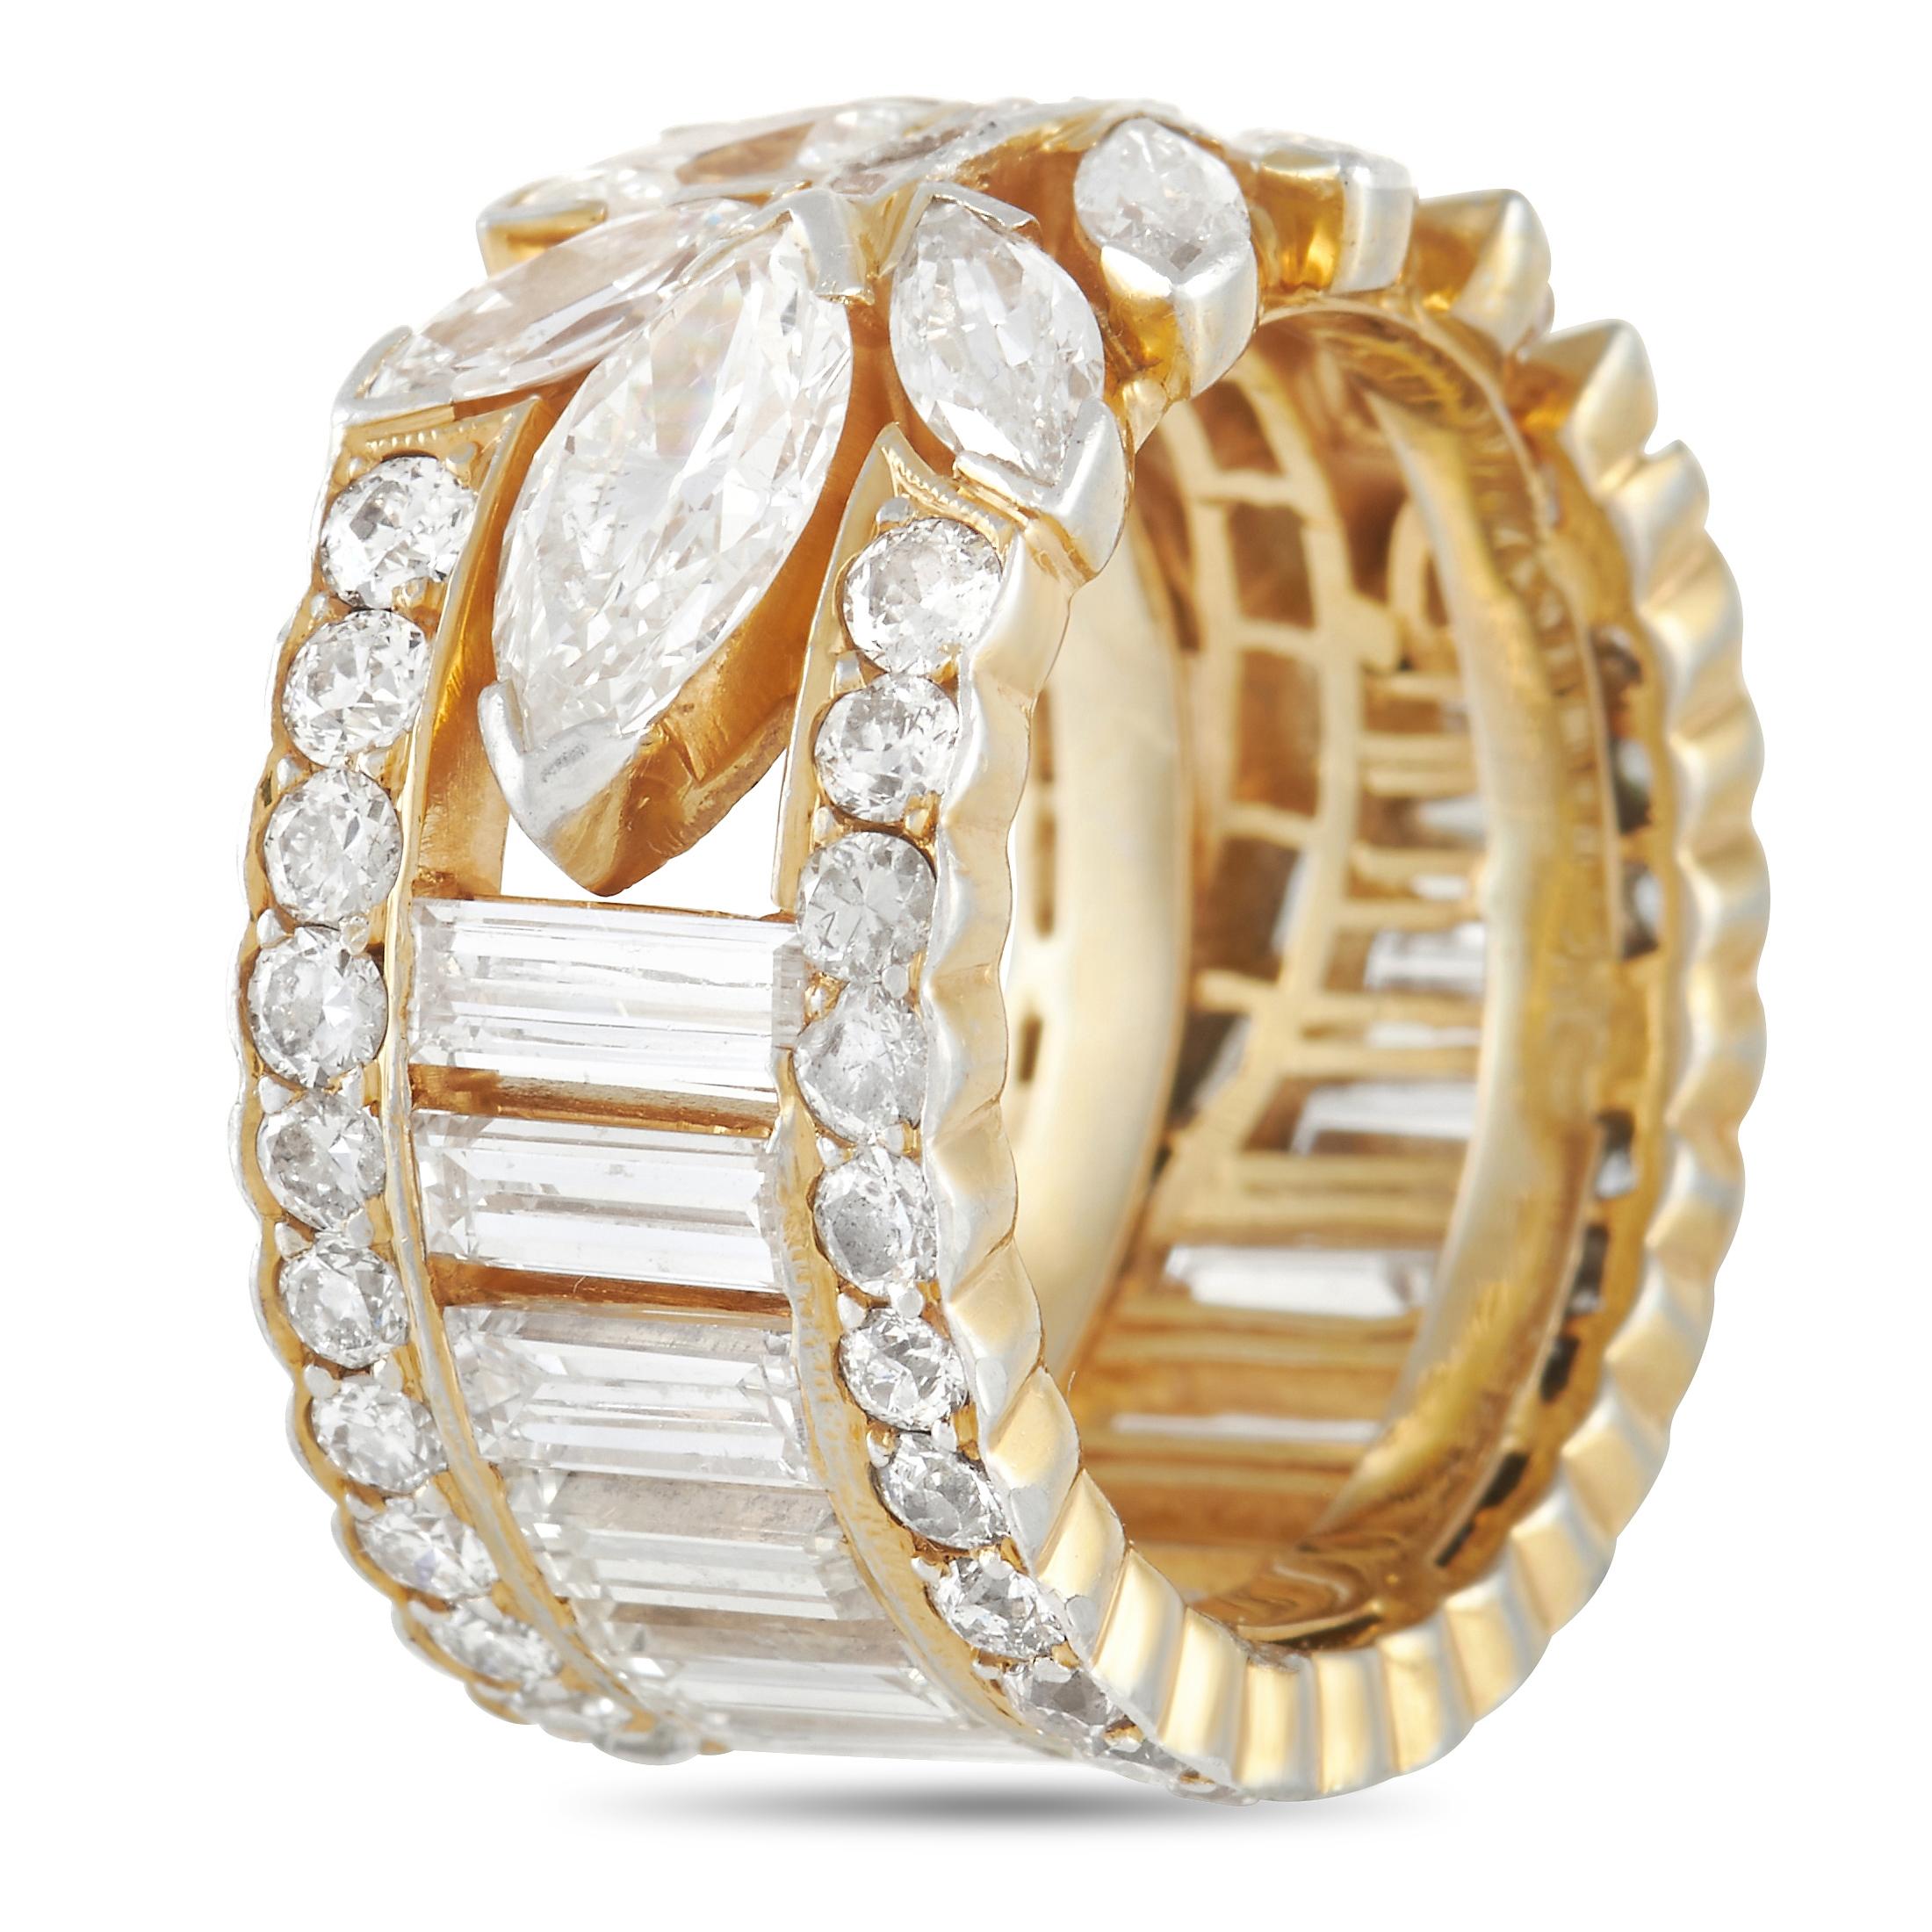 It doesn’t matter if it serves as a wedding band or just as a way to elevate your jewelry collection - this opulent ring is nothing short of spectacular. On this dynamic design, diamond baguettes and marquise cut diamonds combine to create a